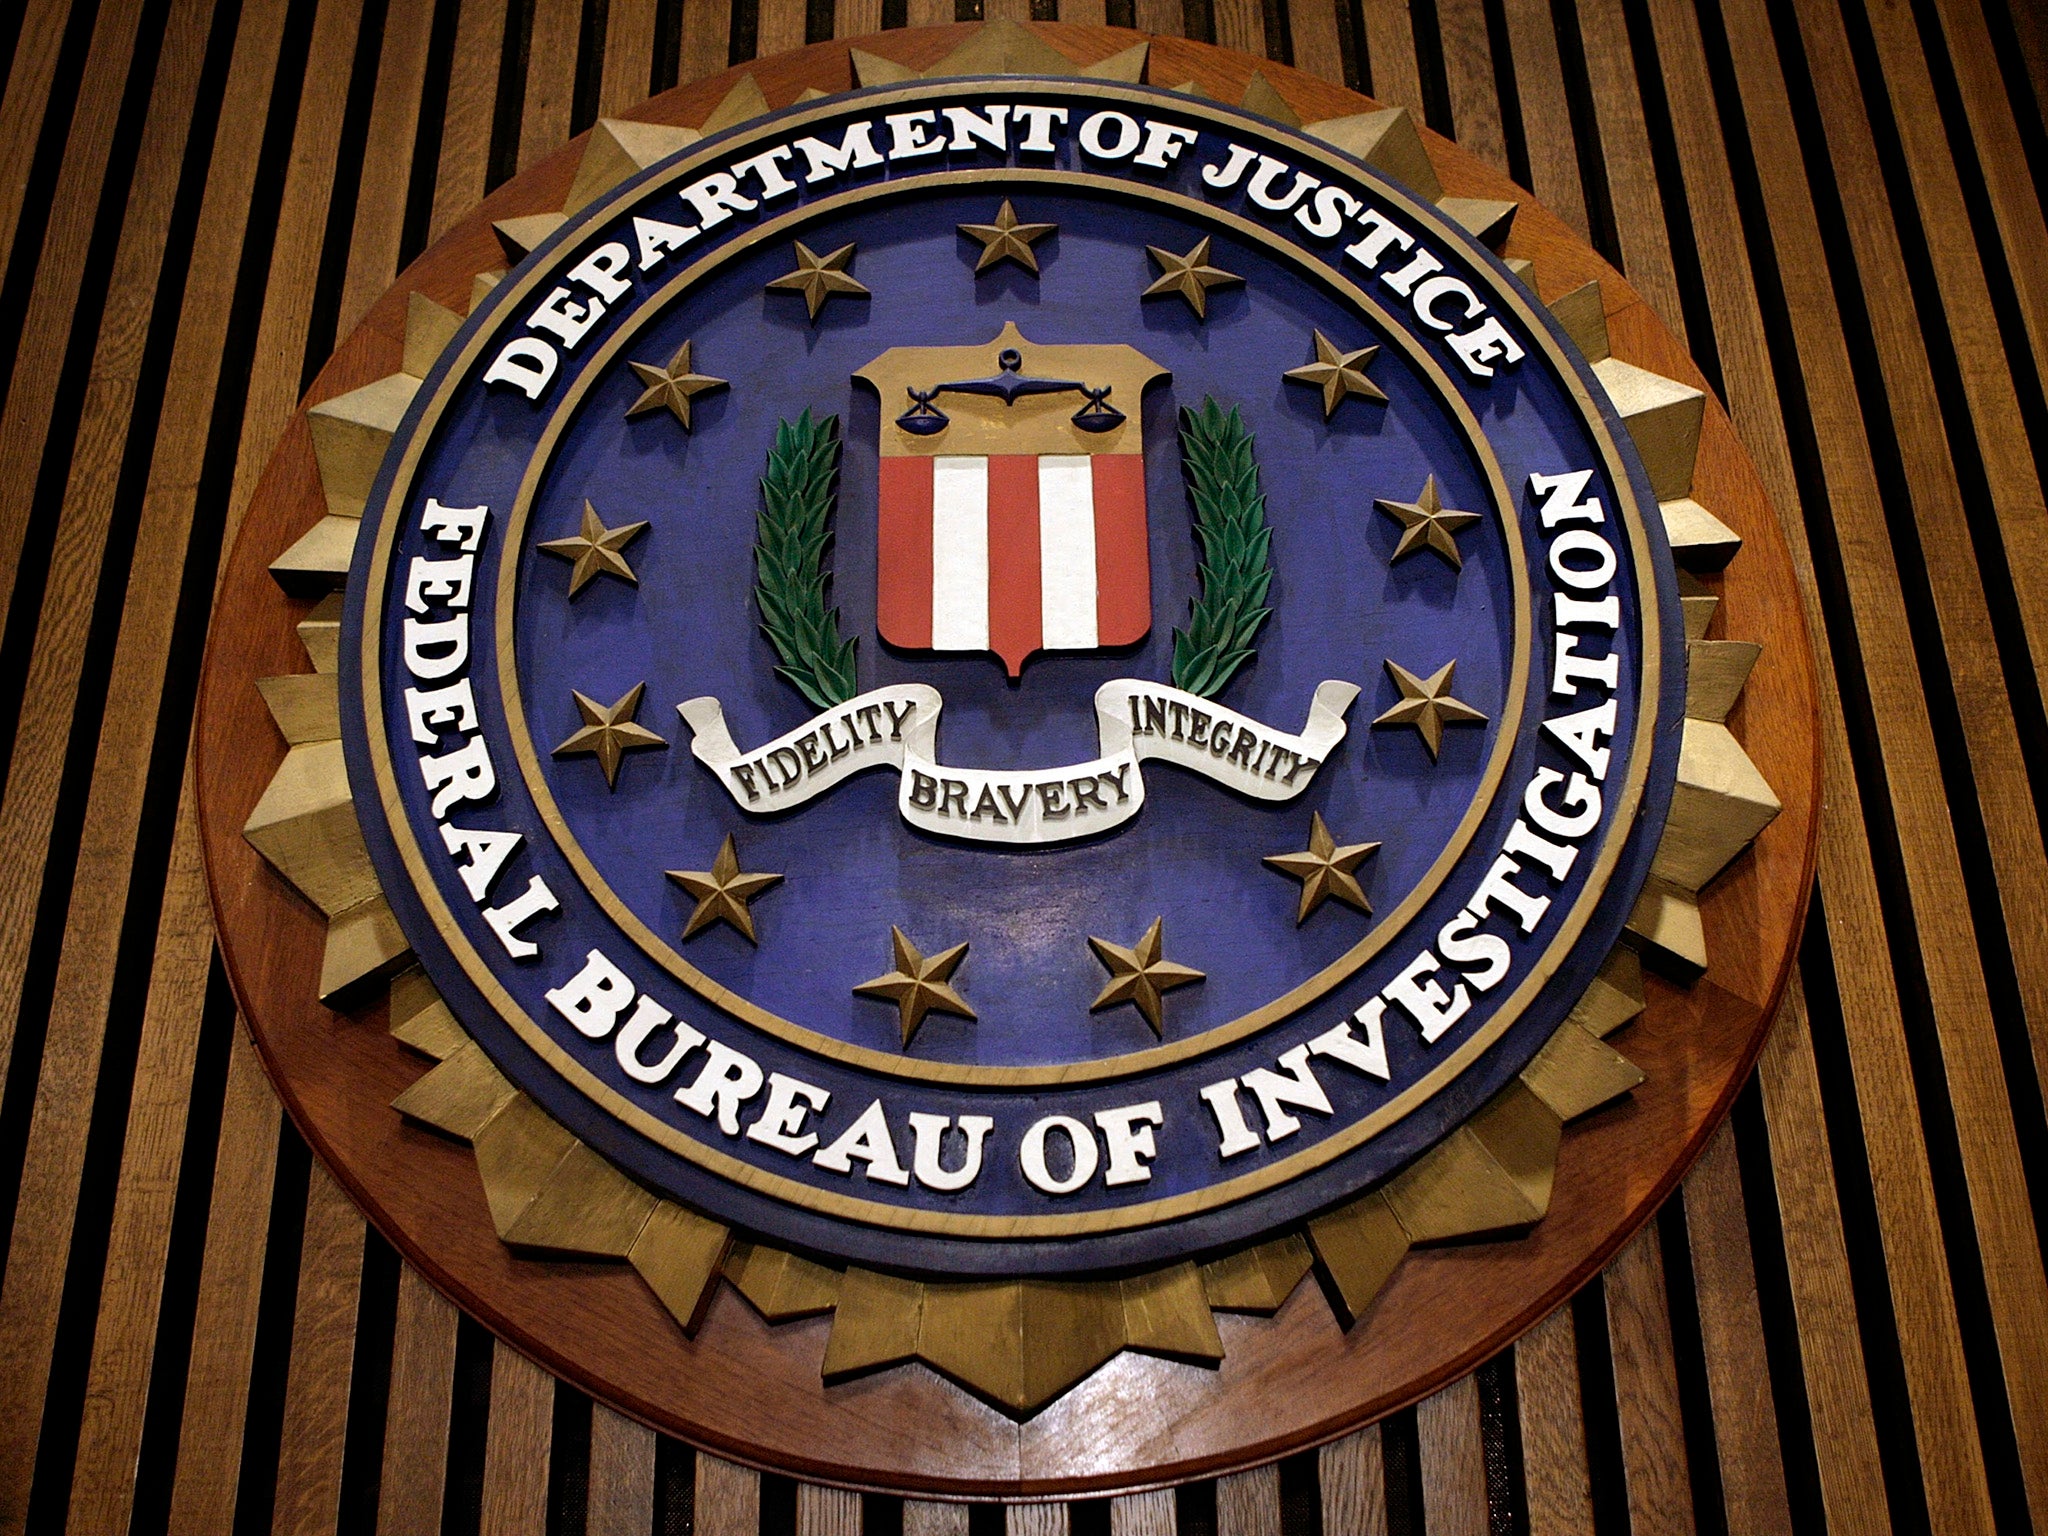 The FBI have accused the five men of conducting a bribery scheme which earned them $12,000